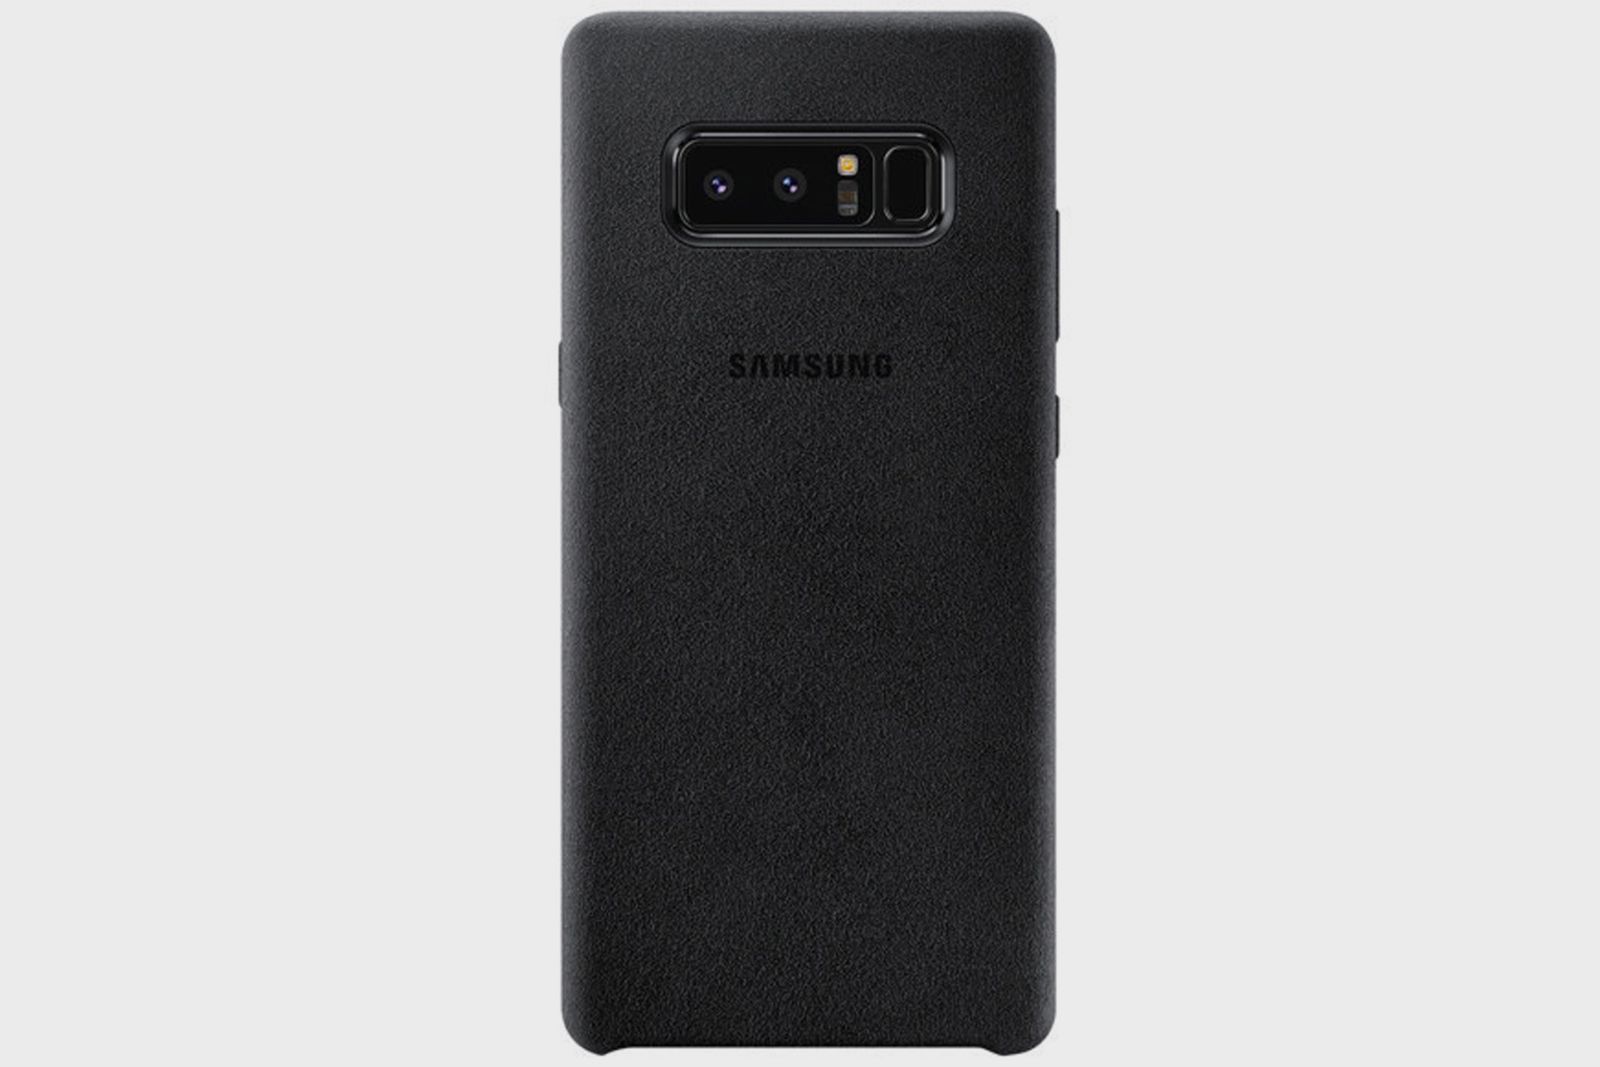 Best Samsung Galaxy Note 8 cases Protect your new 63-inch phablet image 2